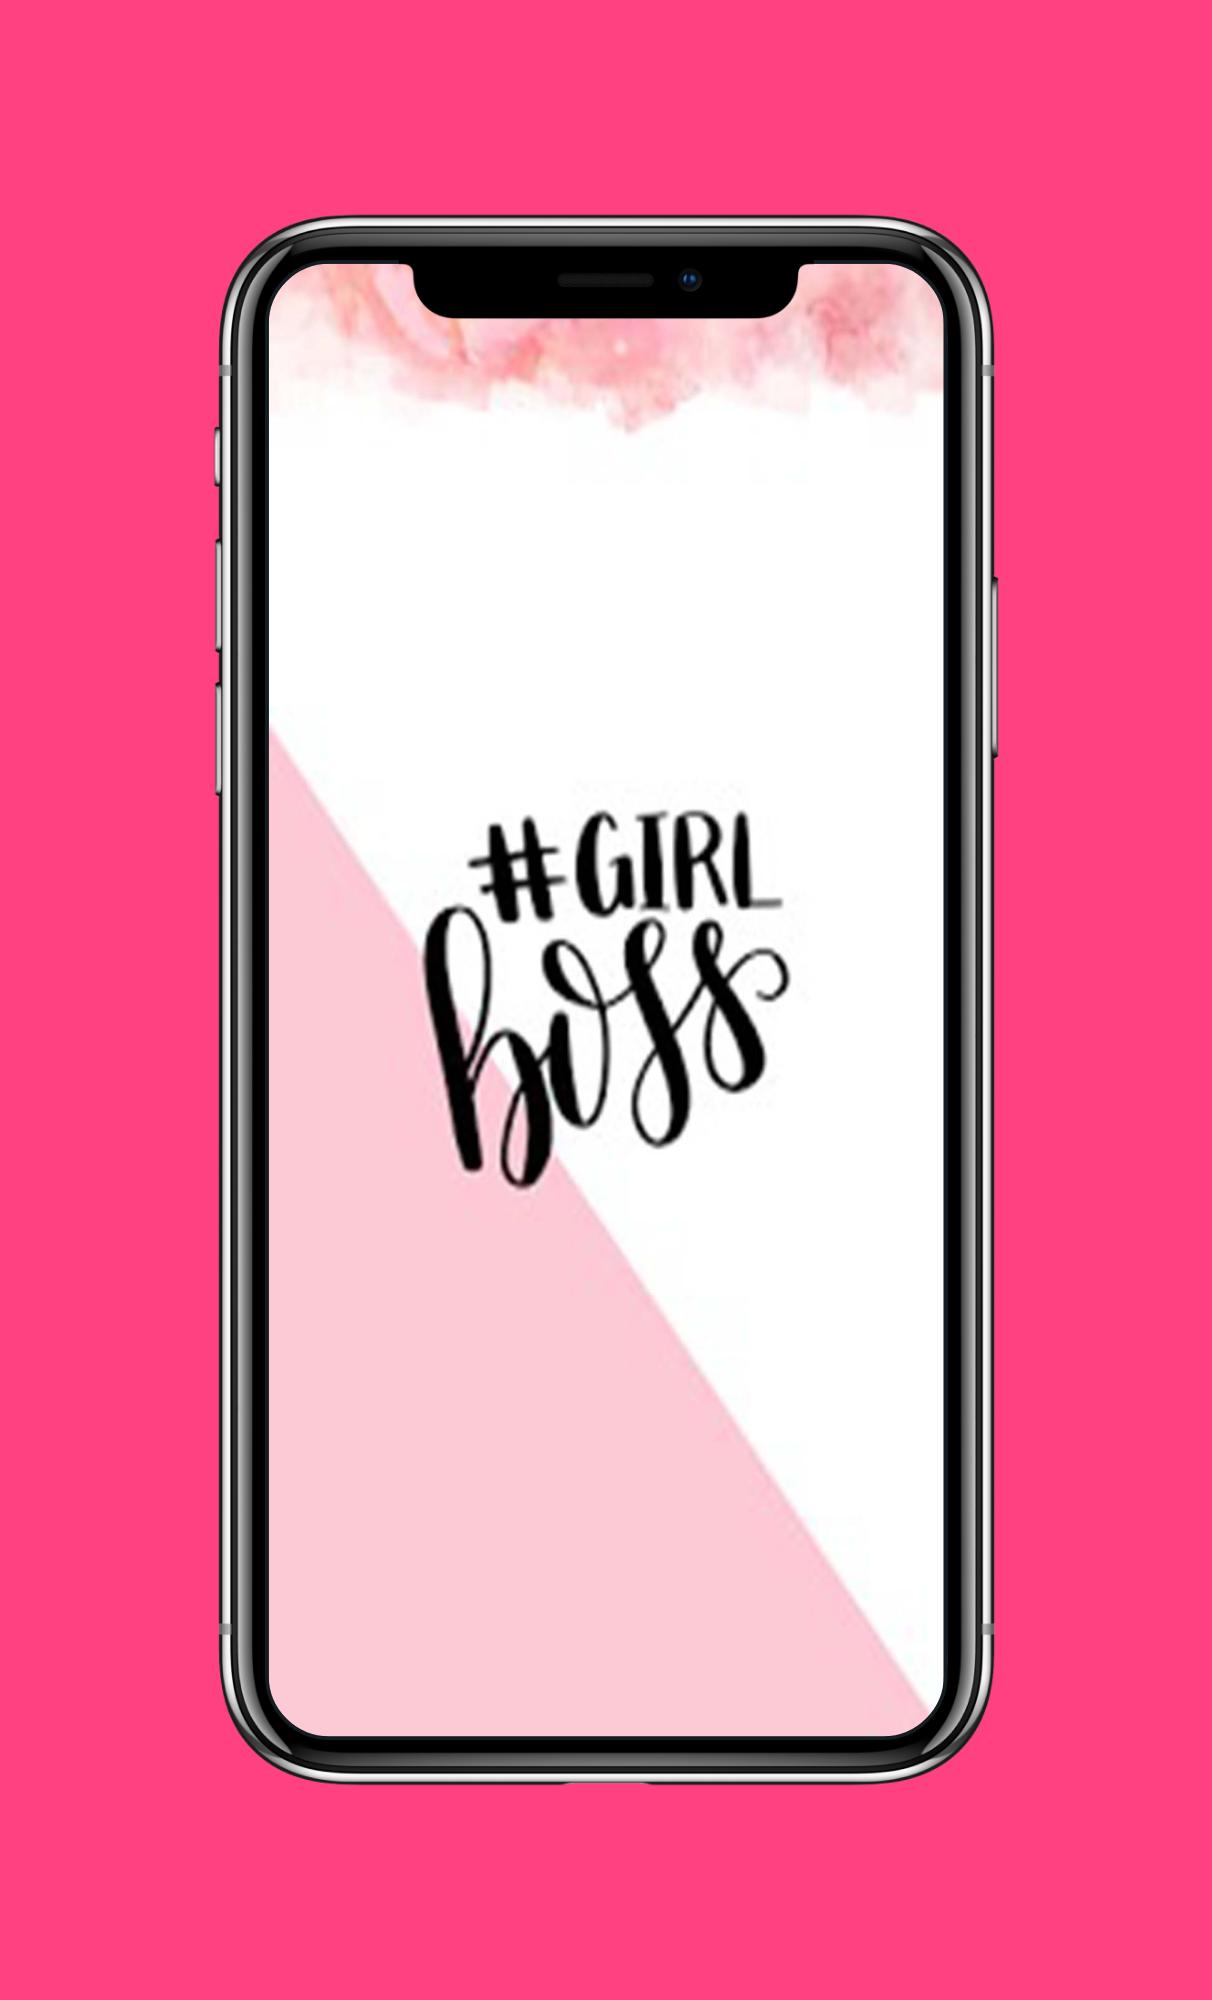 Queen Wallpaper Pink For Android Apk Download